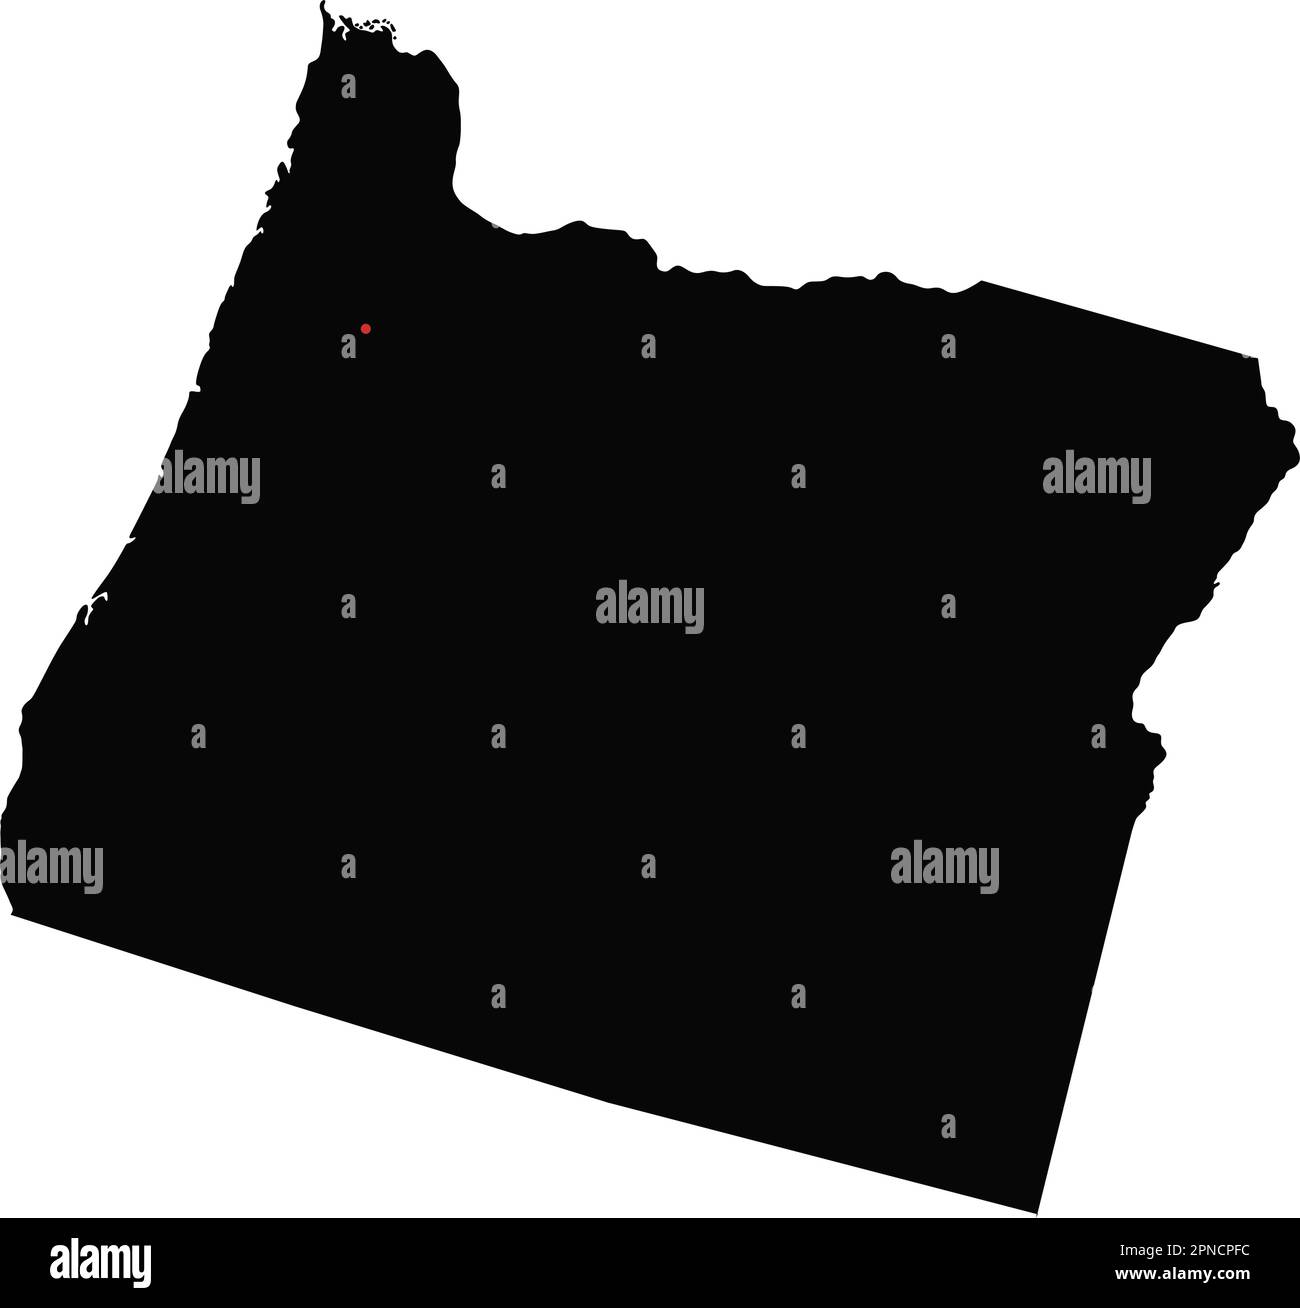 Highly Detailed Oregon Silhouette map. Stock Vector